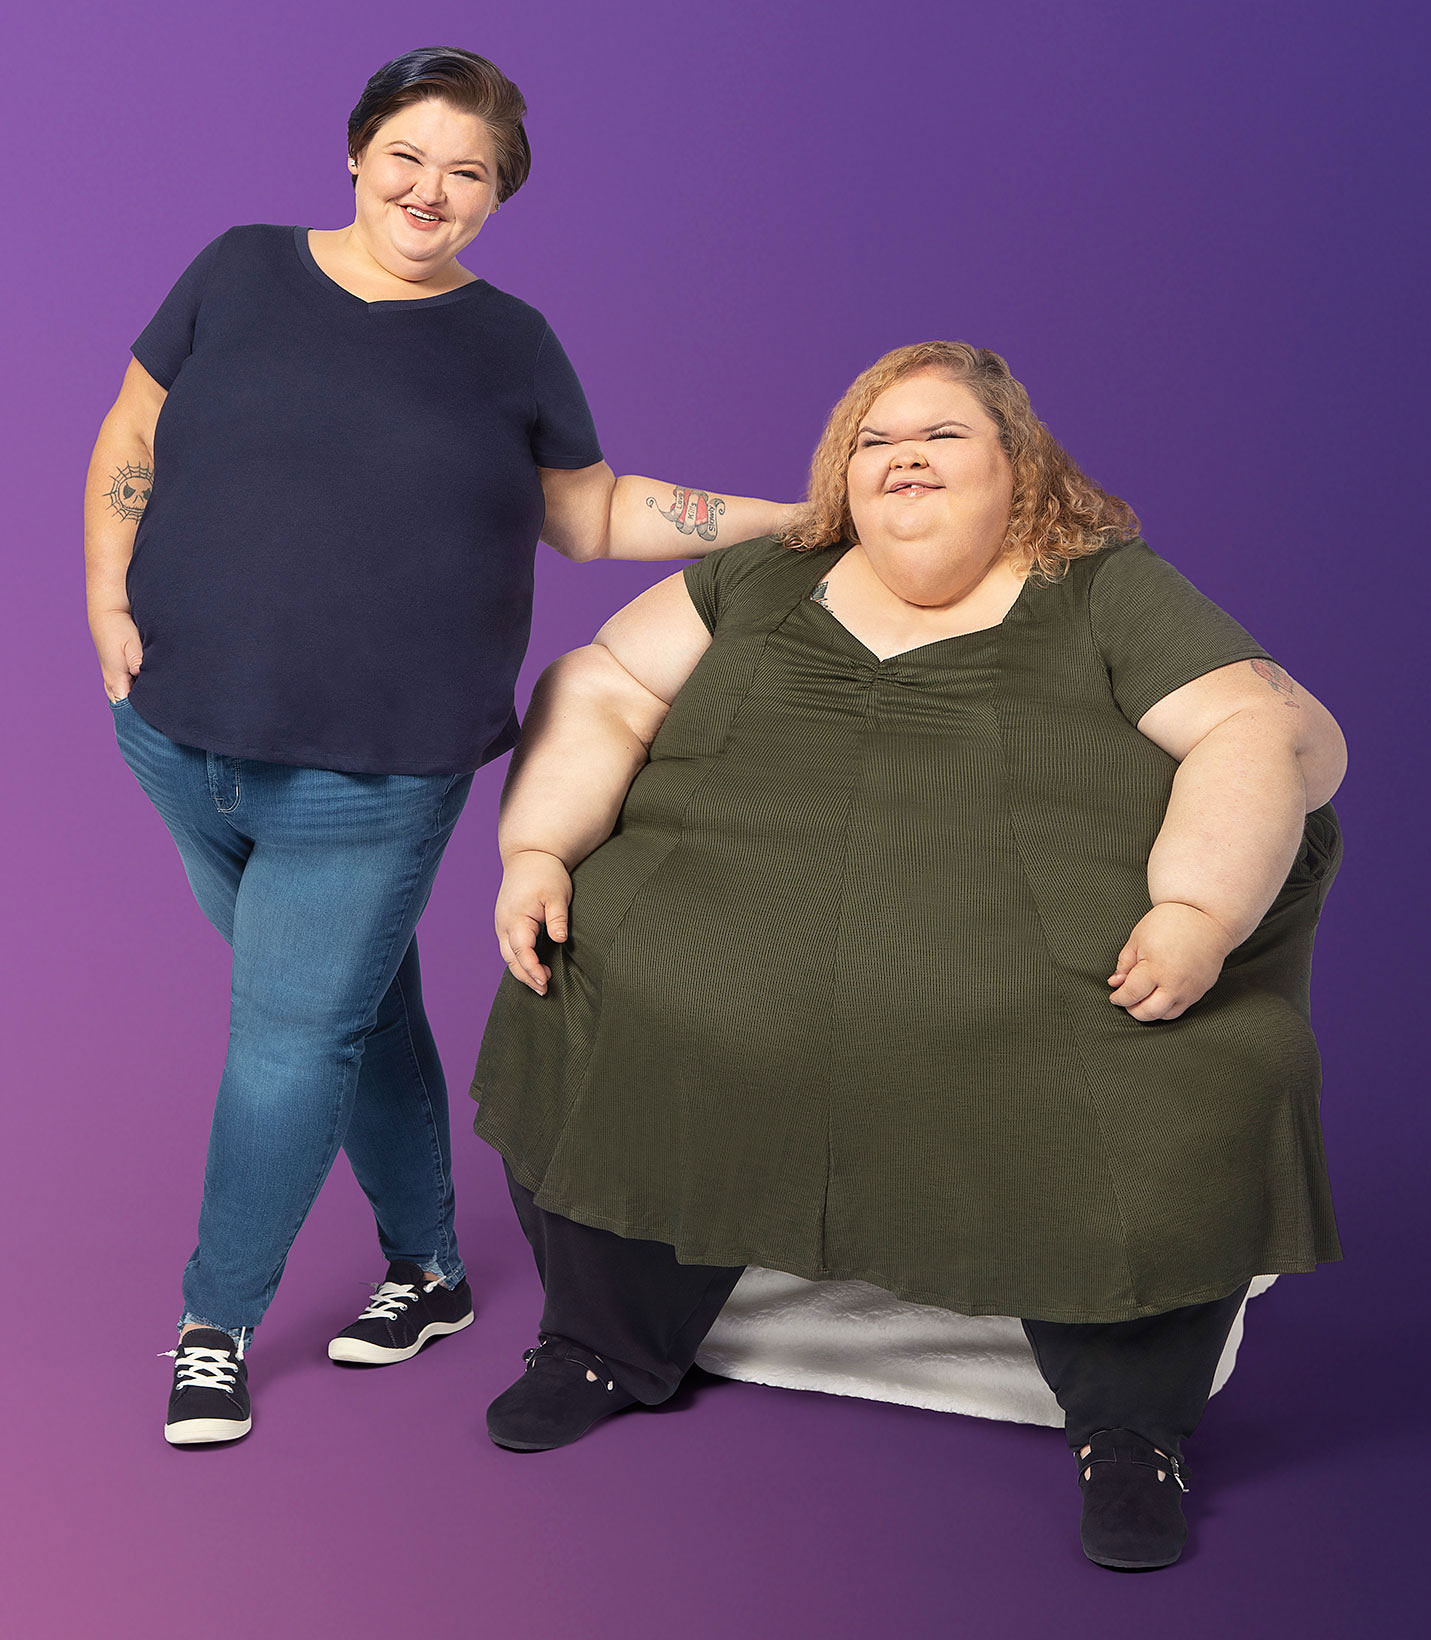 ‘1000Lb Sisters’ Instagram How to Follow Amy, Tammy Slaton In Touch